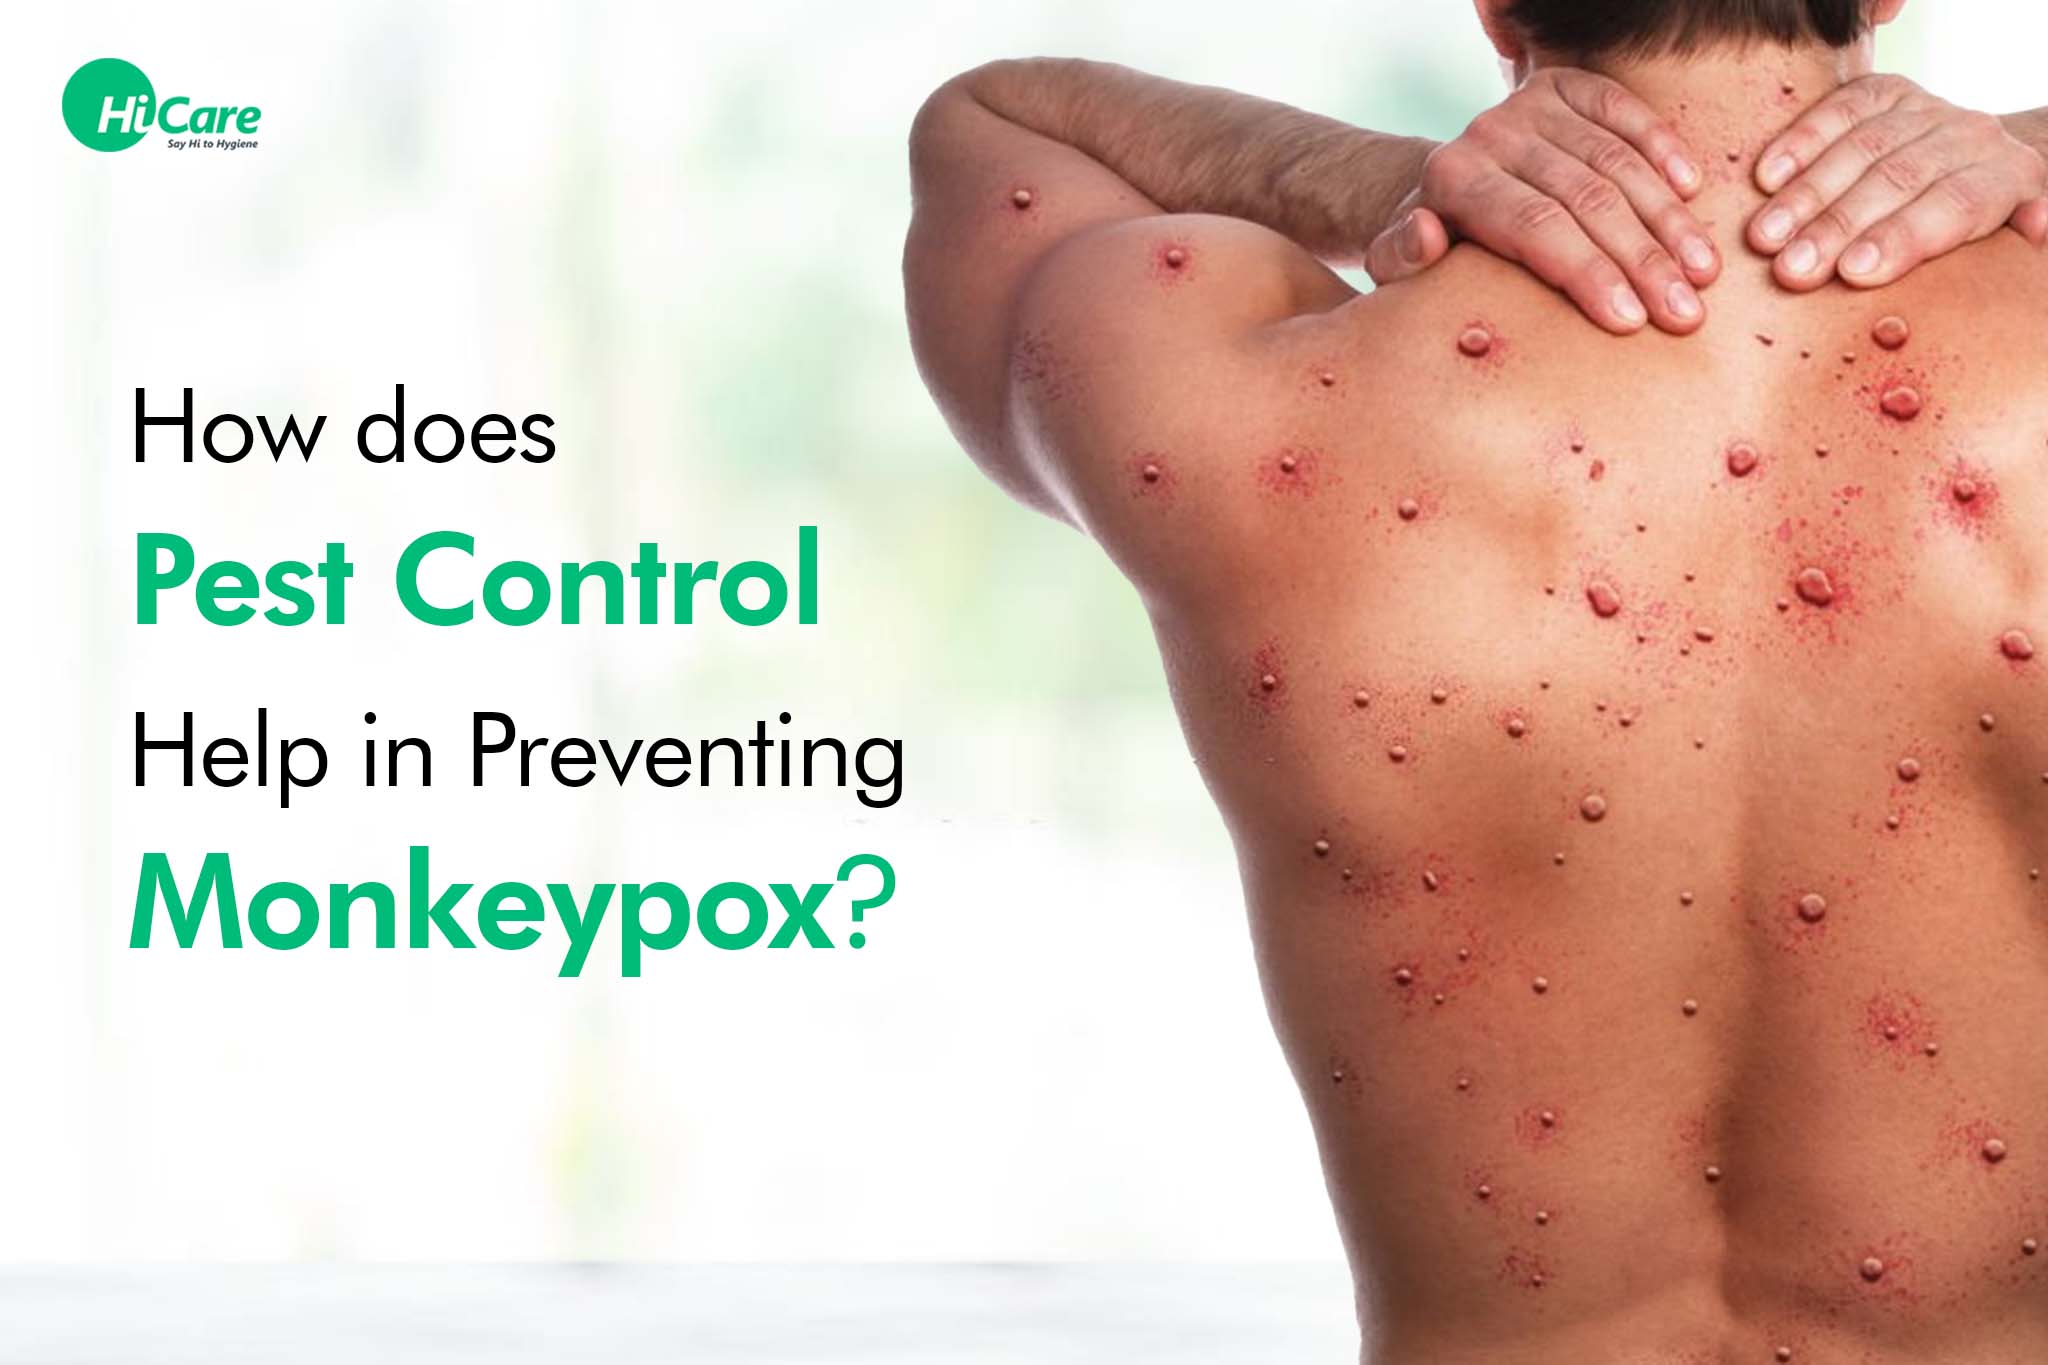 How does Pest Control Help in Preventing Monkeypox?